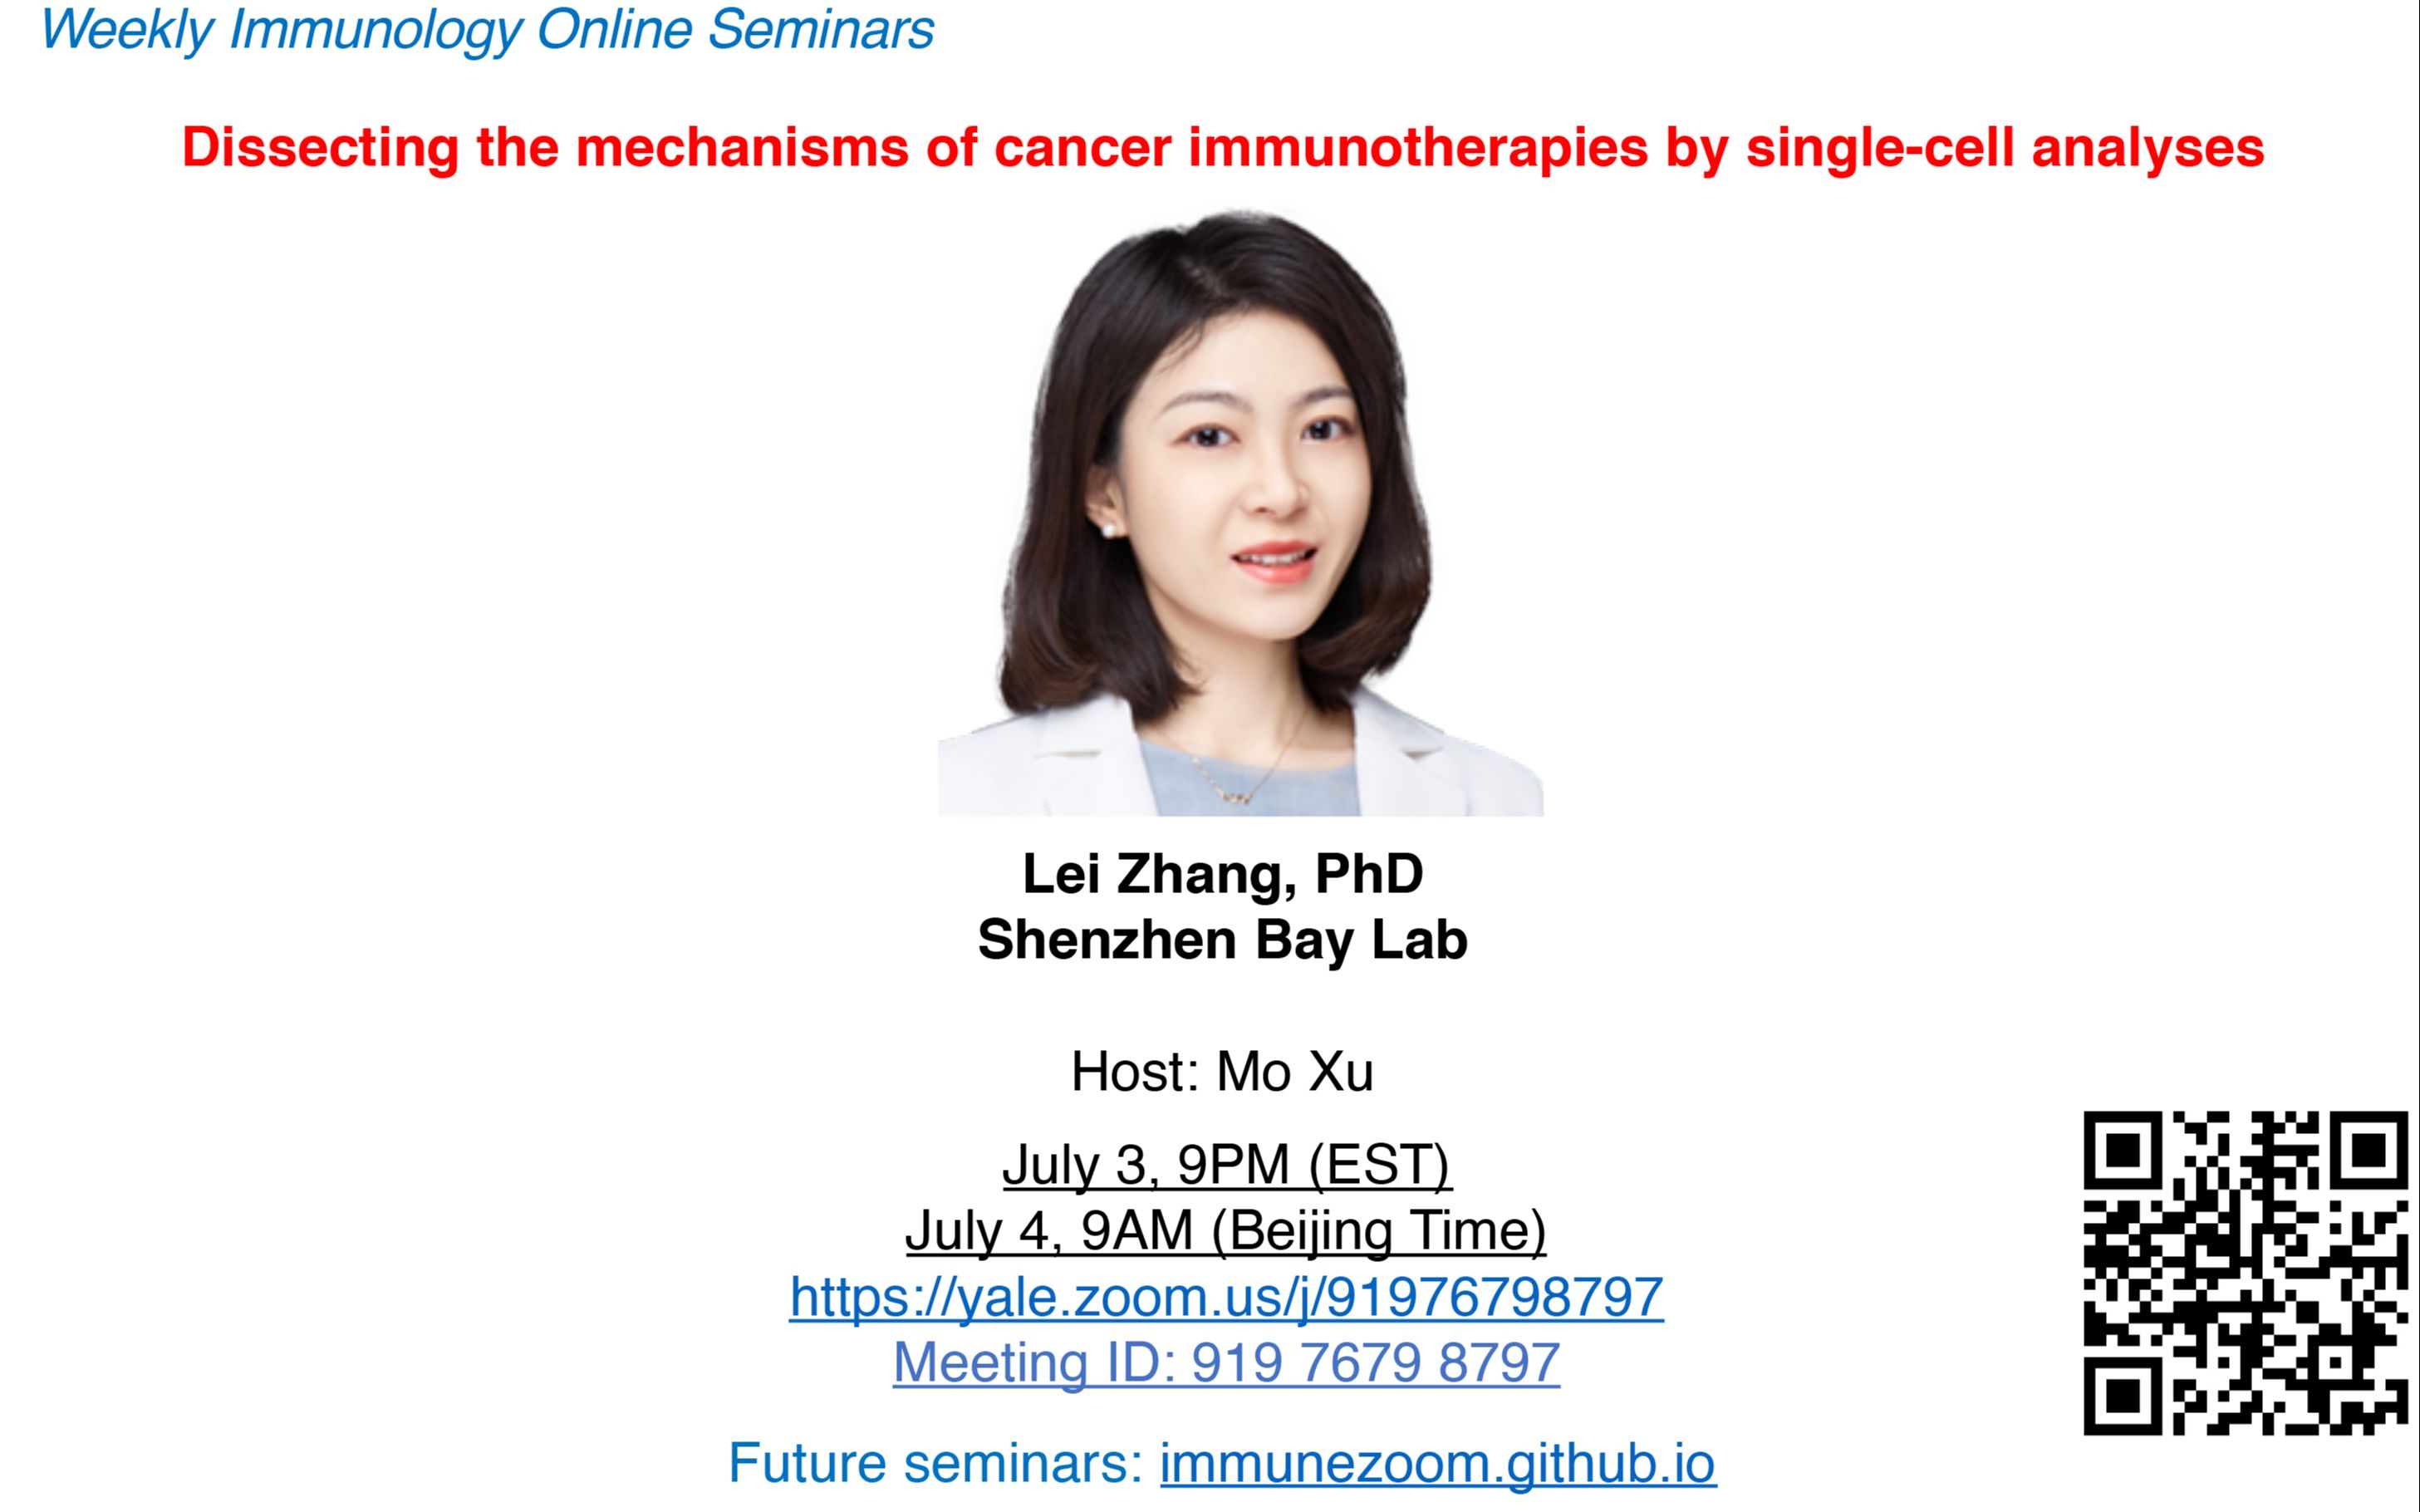 Dissecting the mechanisms of cancer immunotherapies by single-cell analyses